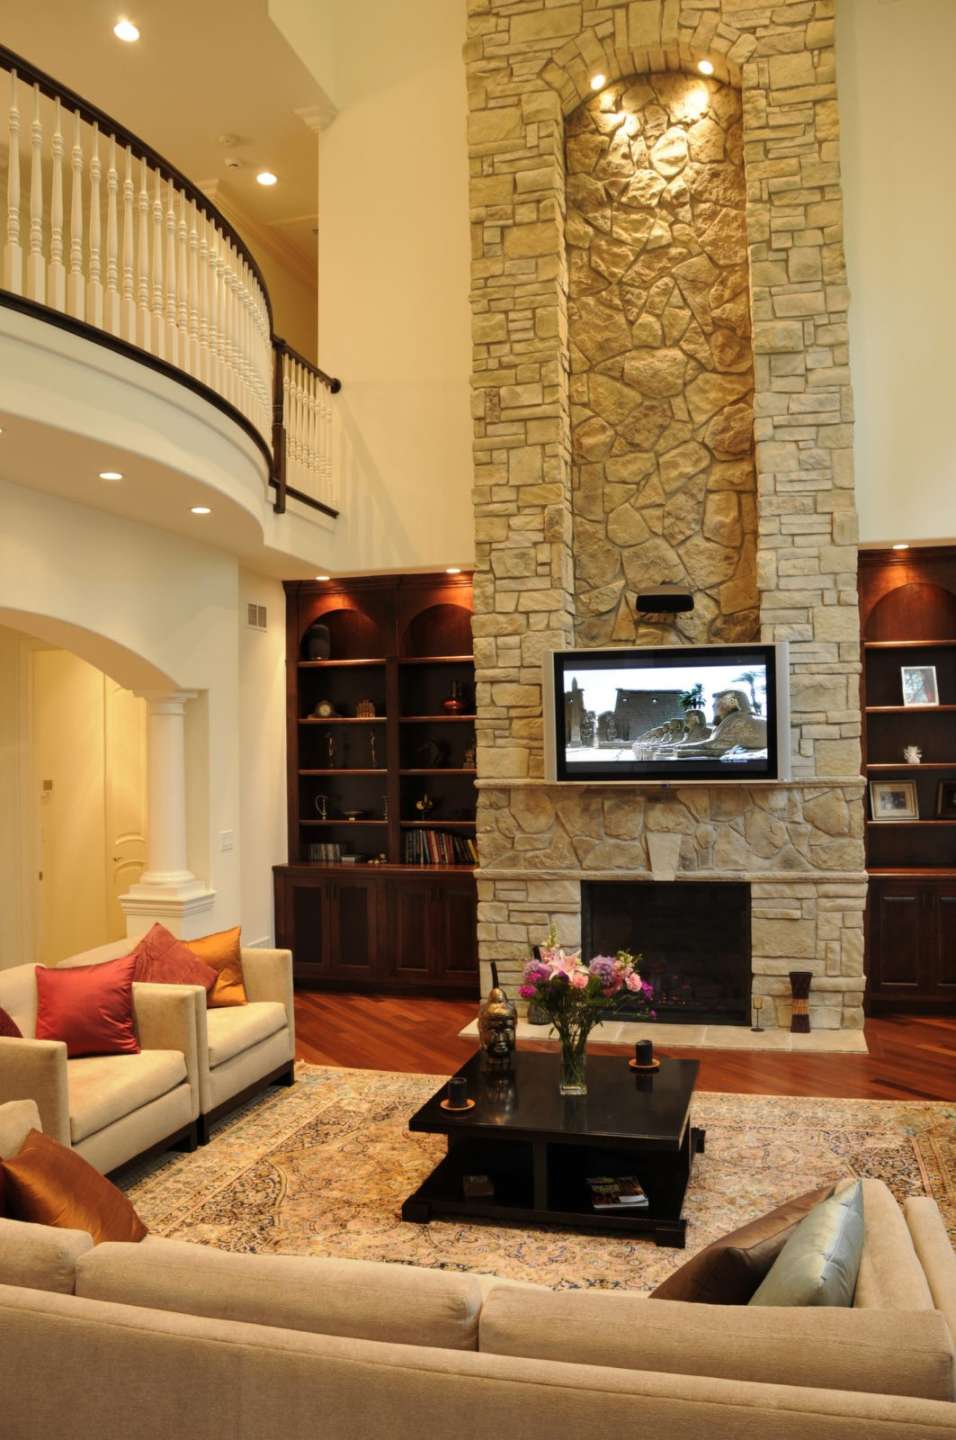 Remodeling Your Two Story Fireplace - North Star Stone